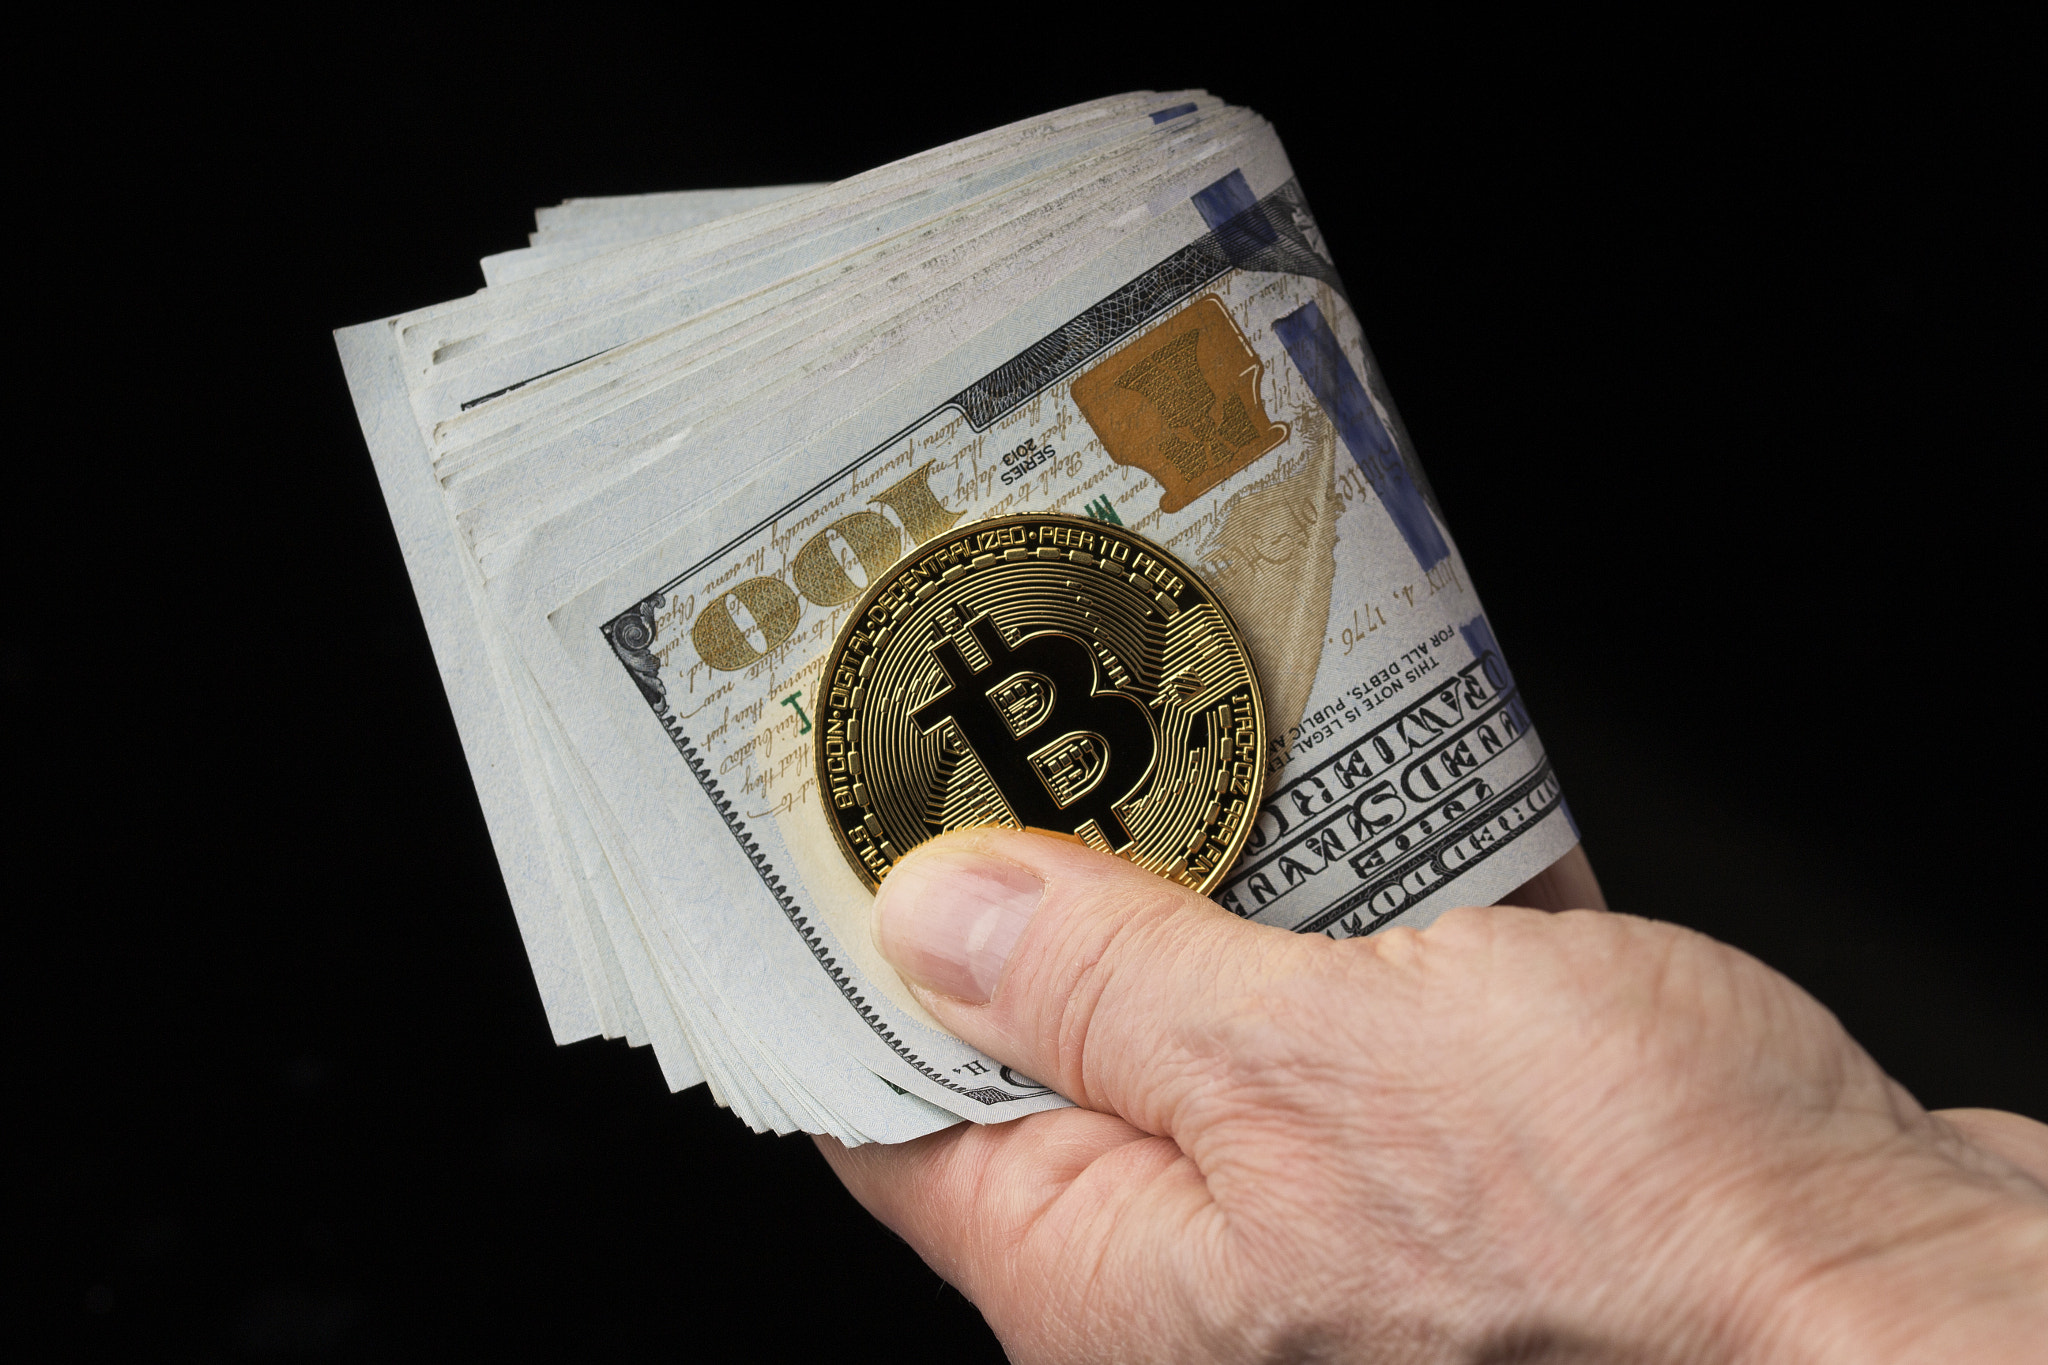 feale hand holds bitcoin and dollar bills on black background